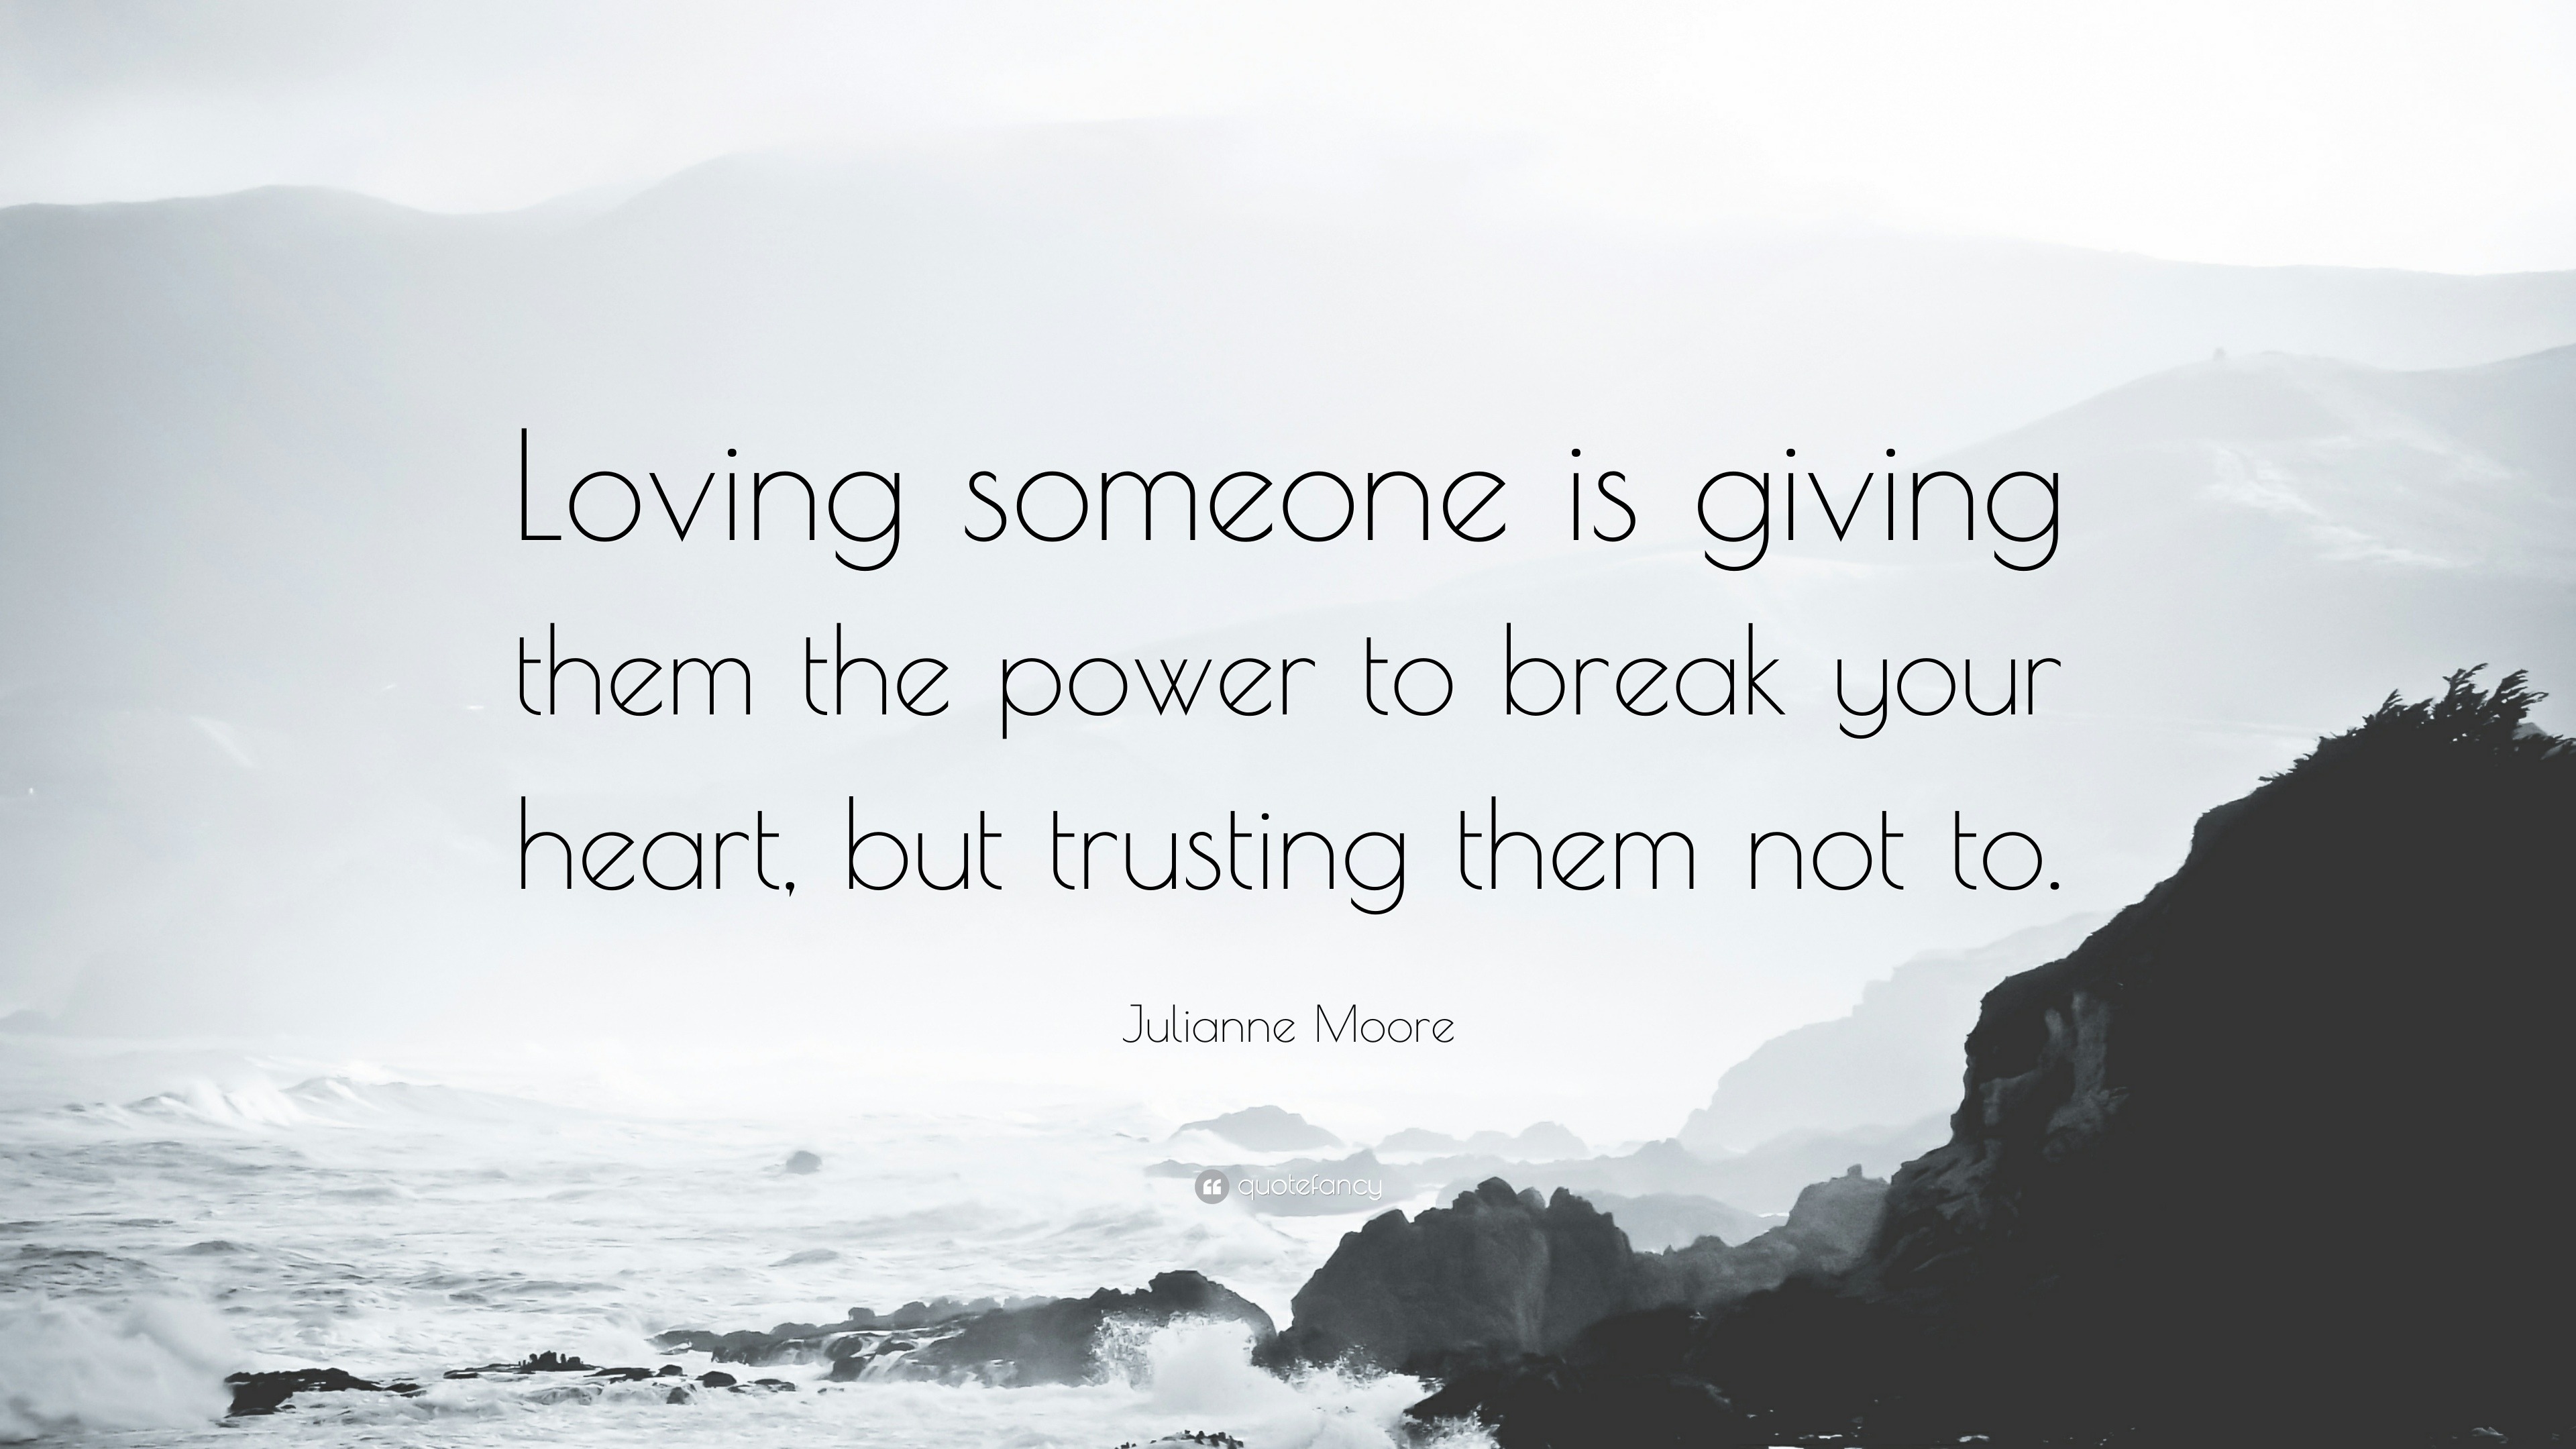 Julianne Moore Quote: “Loving someone is giving them the power to break